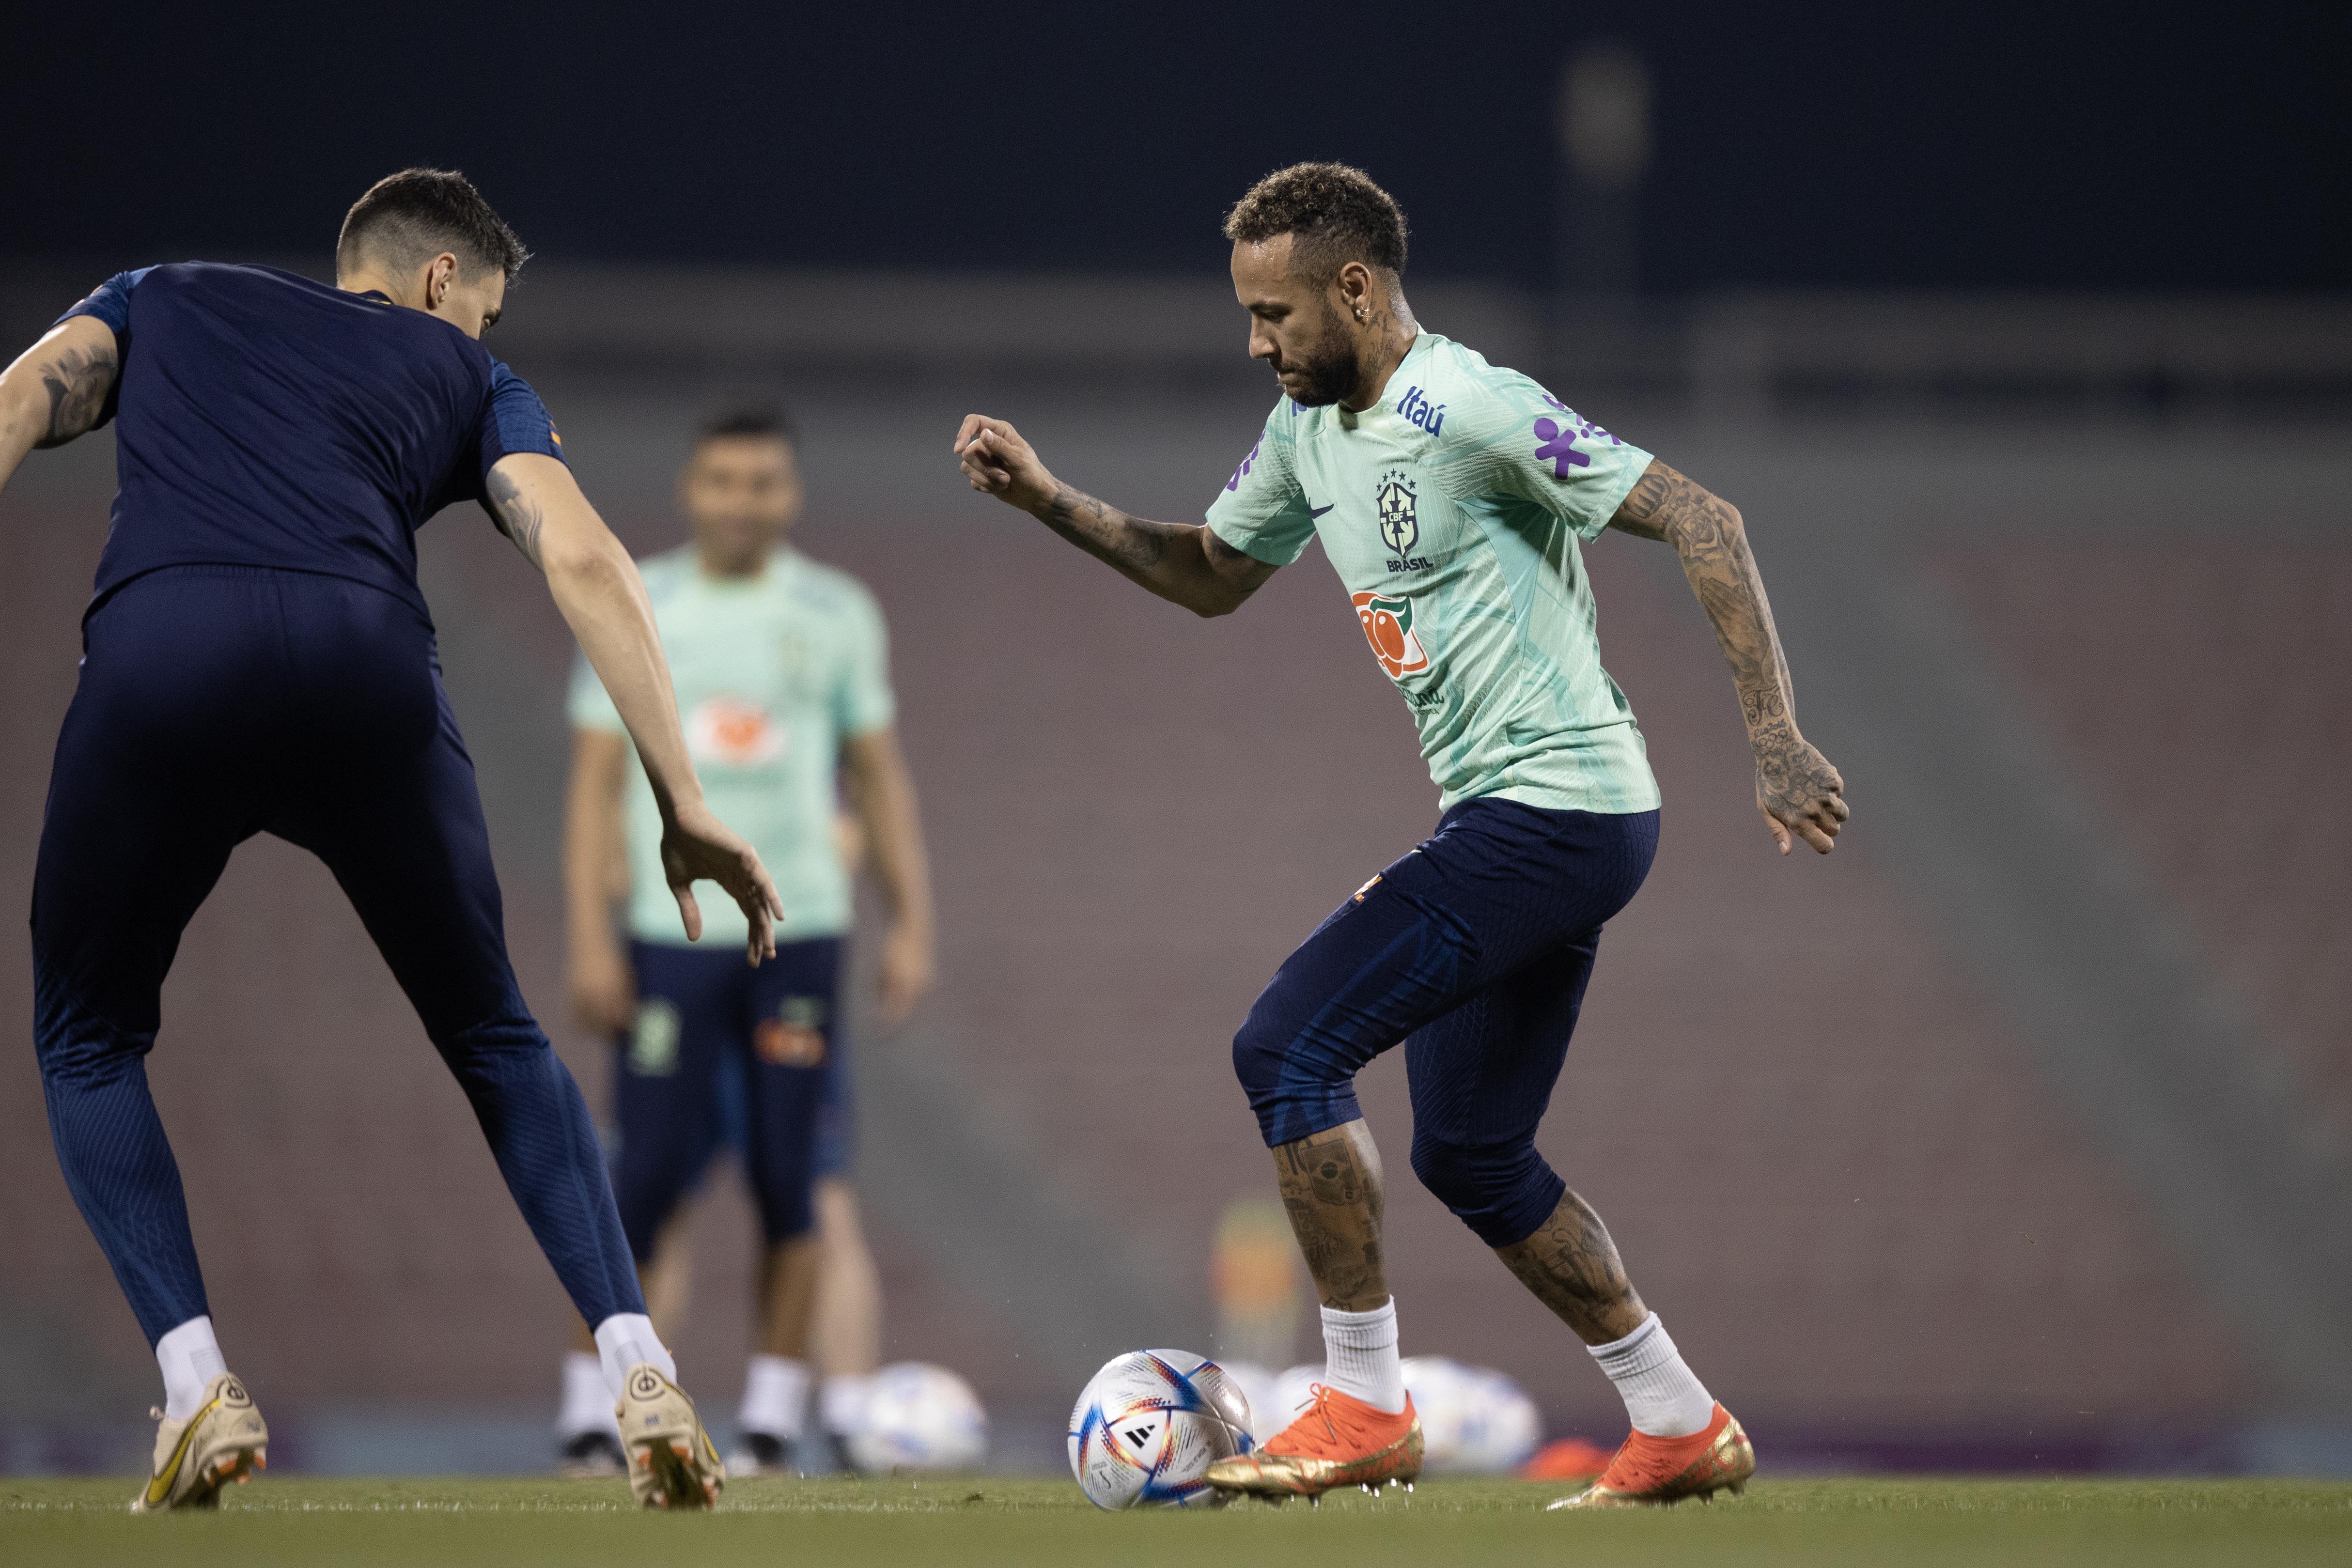 Neymar Jr is back training with the ball before the match against Korea